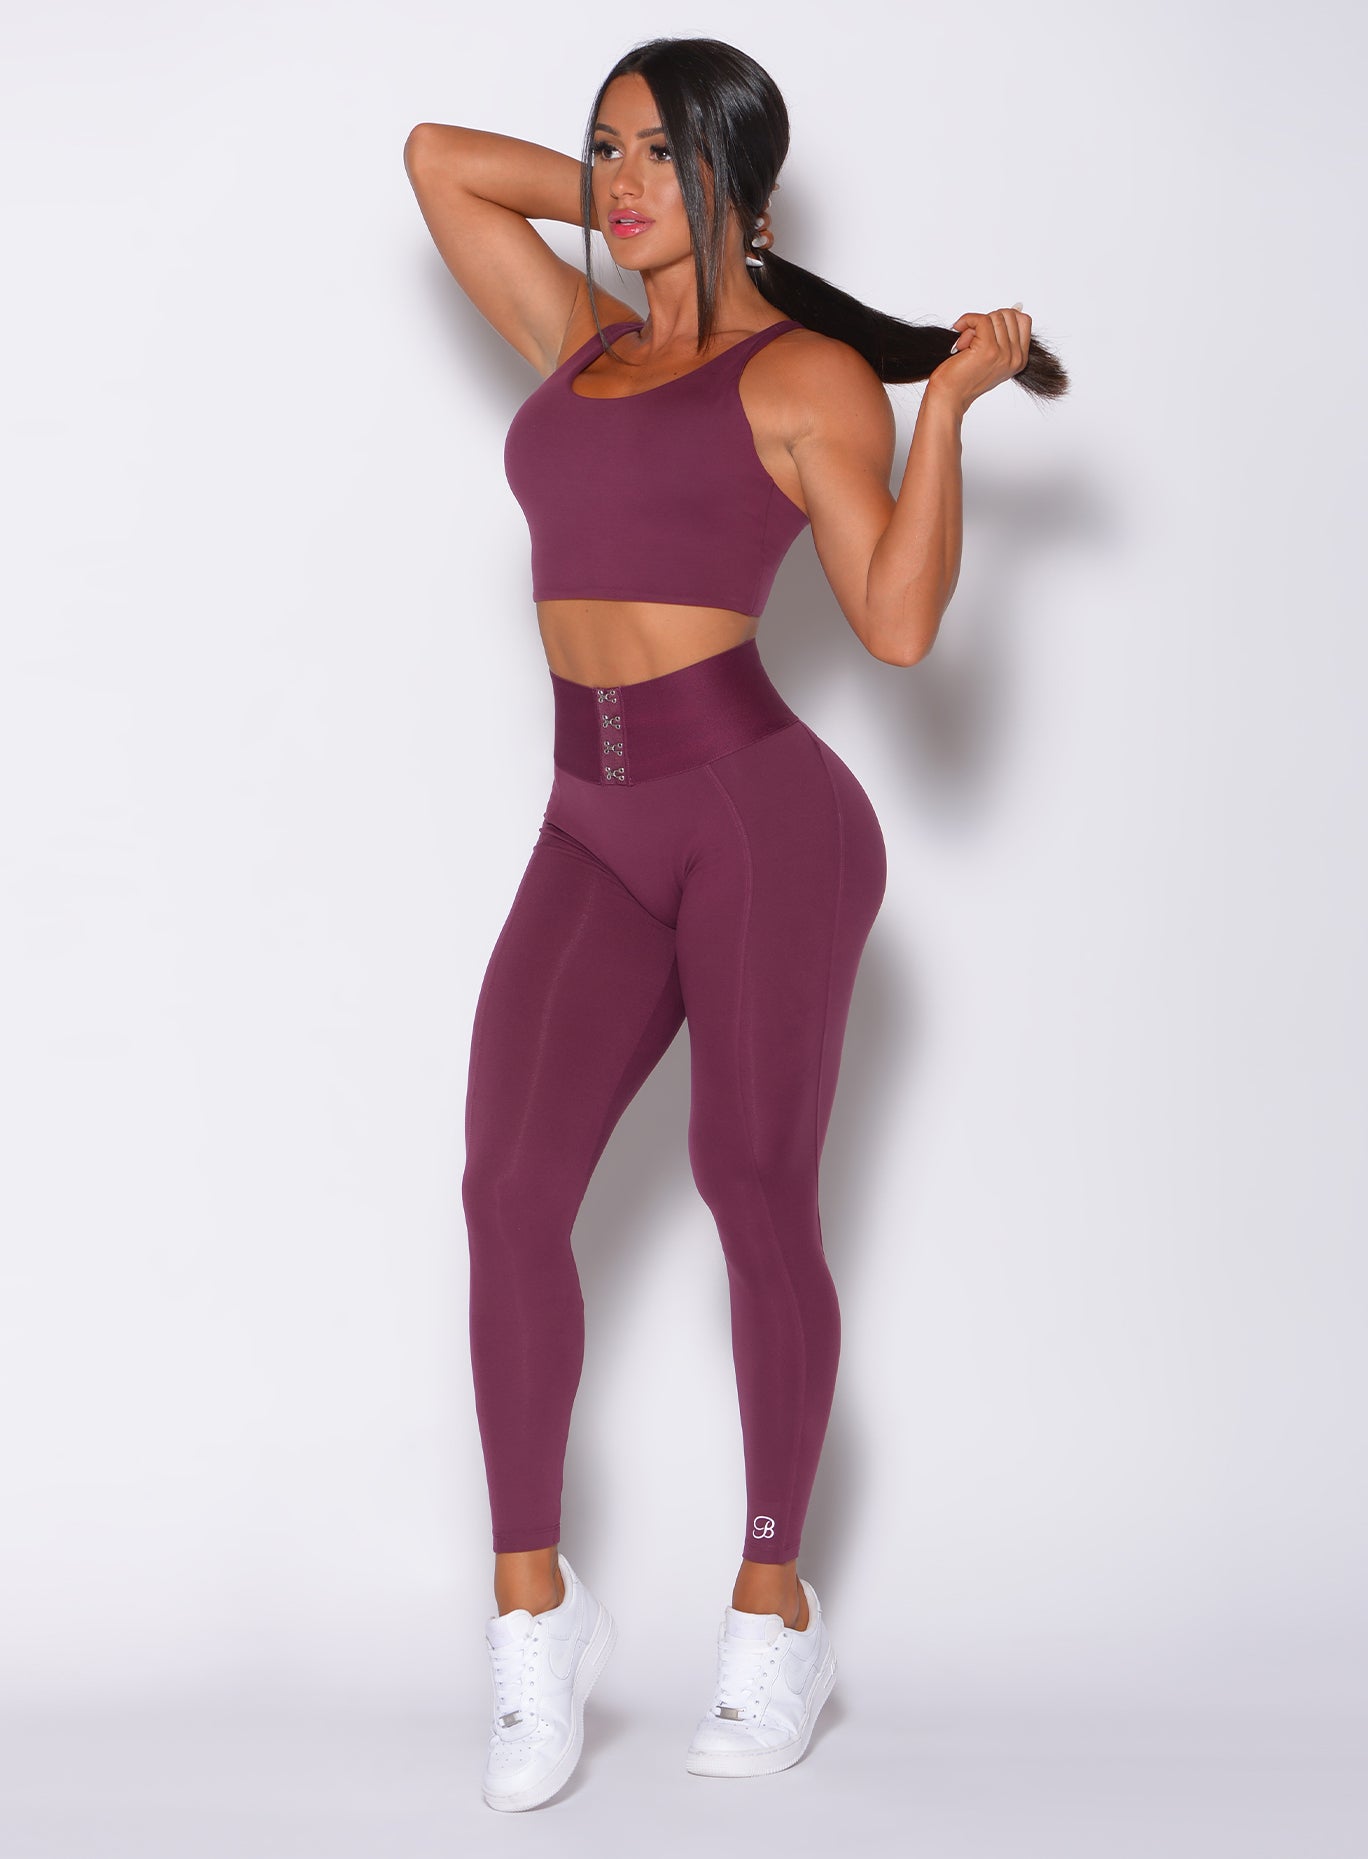 Front profile view of a model holding her hair wearing our impact sports bra in majestic purple color and a matching leggings